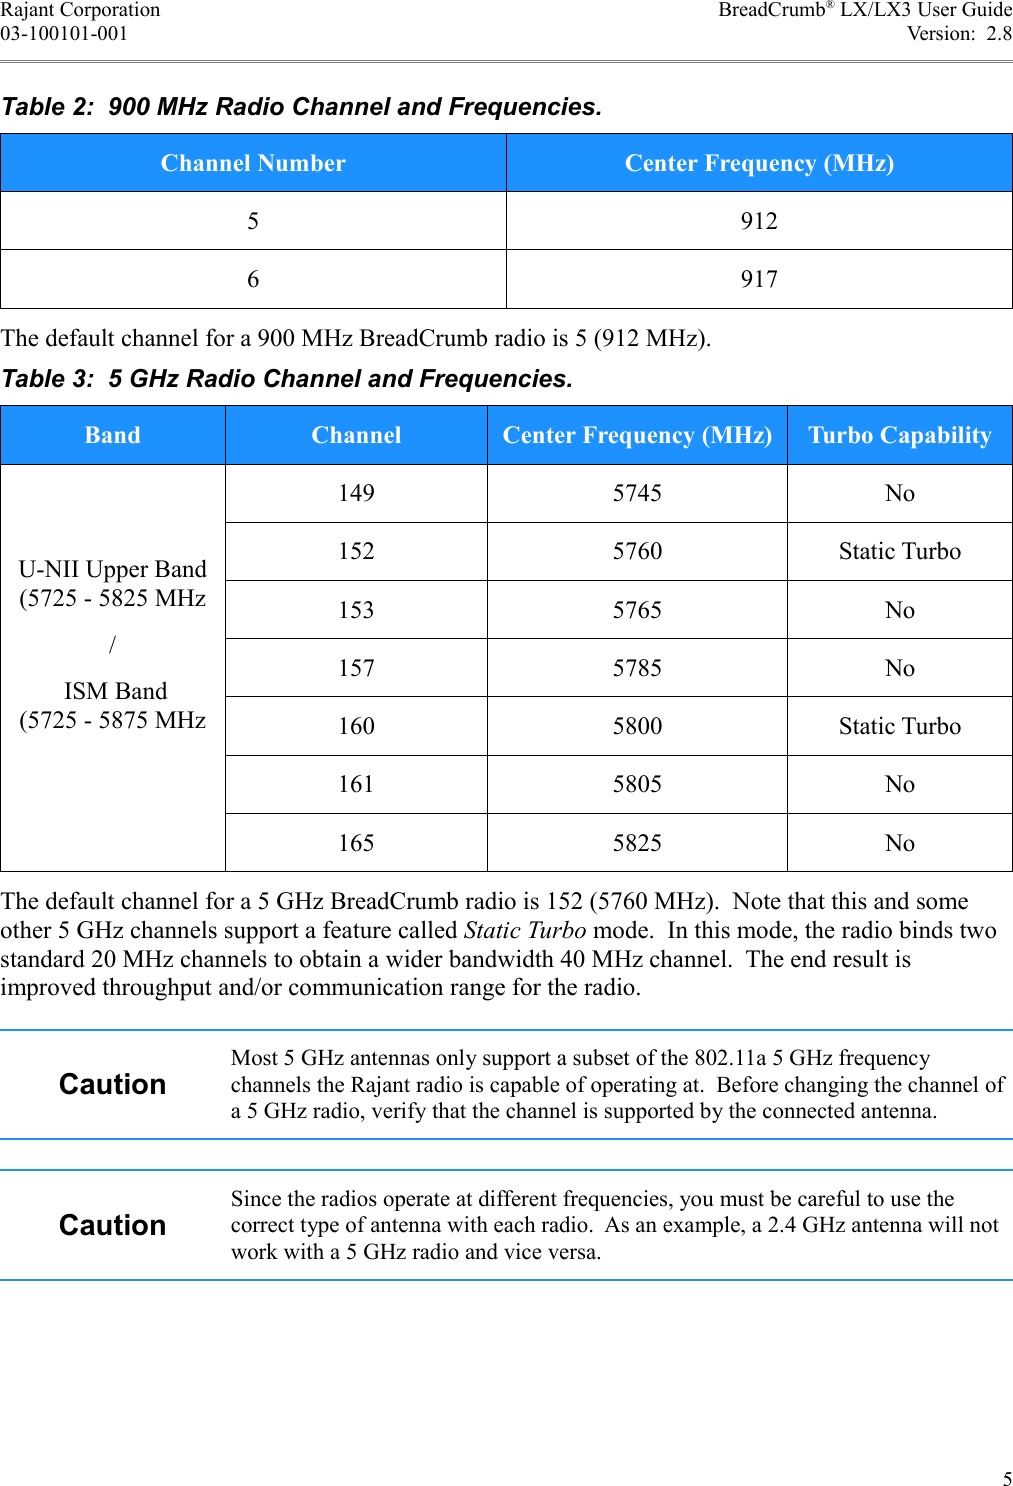 Rajant Corporation BreadCrumb® LX/LX3 User Guide03-100101-001 Version:  2.8Table 2:  900 MHz Radio Channel and Frequencies.Channel Number Center Frequency (MHz)5 9126 917The default channel for a 900 MHz BreadCrumb radio is 5 (912 MHz).Table 3:  5 GHz Radio Channel and Frequencies.Band Channel Center Frequency (MHz) Turbo CapabilityU-NII Upper Band (5725 - 5825 MHz/ ISM Band (5725 - 5875 MHz149 5745 No152 5760 Static Turbo153 5765 No157 5785 No160 5800 Static Turbo161 5805 No165 5825 NoThe default channel for a 5 GHz BreadCrumb radio is 152 (5760 MHz).  Note that this and some other 5 GHz channels support a feature called Static Turbo mode.  In this mode, the radio binds two standard 20 MHz channels to obtain a wider bandwidth 40 MHz channel.  The end result is improved throughput and/or communication range for the radio. CautionMost 5 GHz antennas only support a subset of the 802.11a 5 GHz frequency channels the Rajant radio is capable of operating at.  Before changing the channel of a 5 GHz radio, verify that the channel is supported by the connected antenna.CautionSince the radios operate at different frequencies, you must be careful to use the correct type of antenna with each radio.  As an example, a 2.4 GHz antenna will not work with a 5 GHz radio and vice versa.5